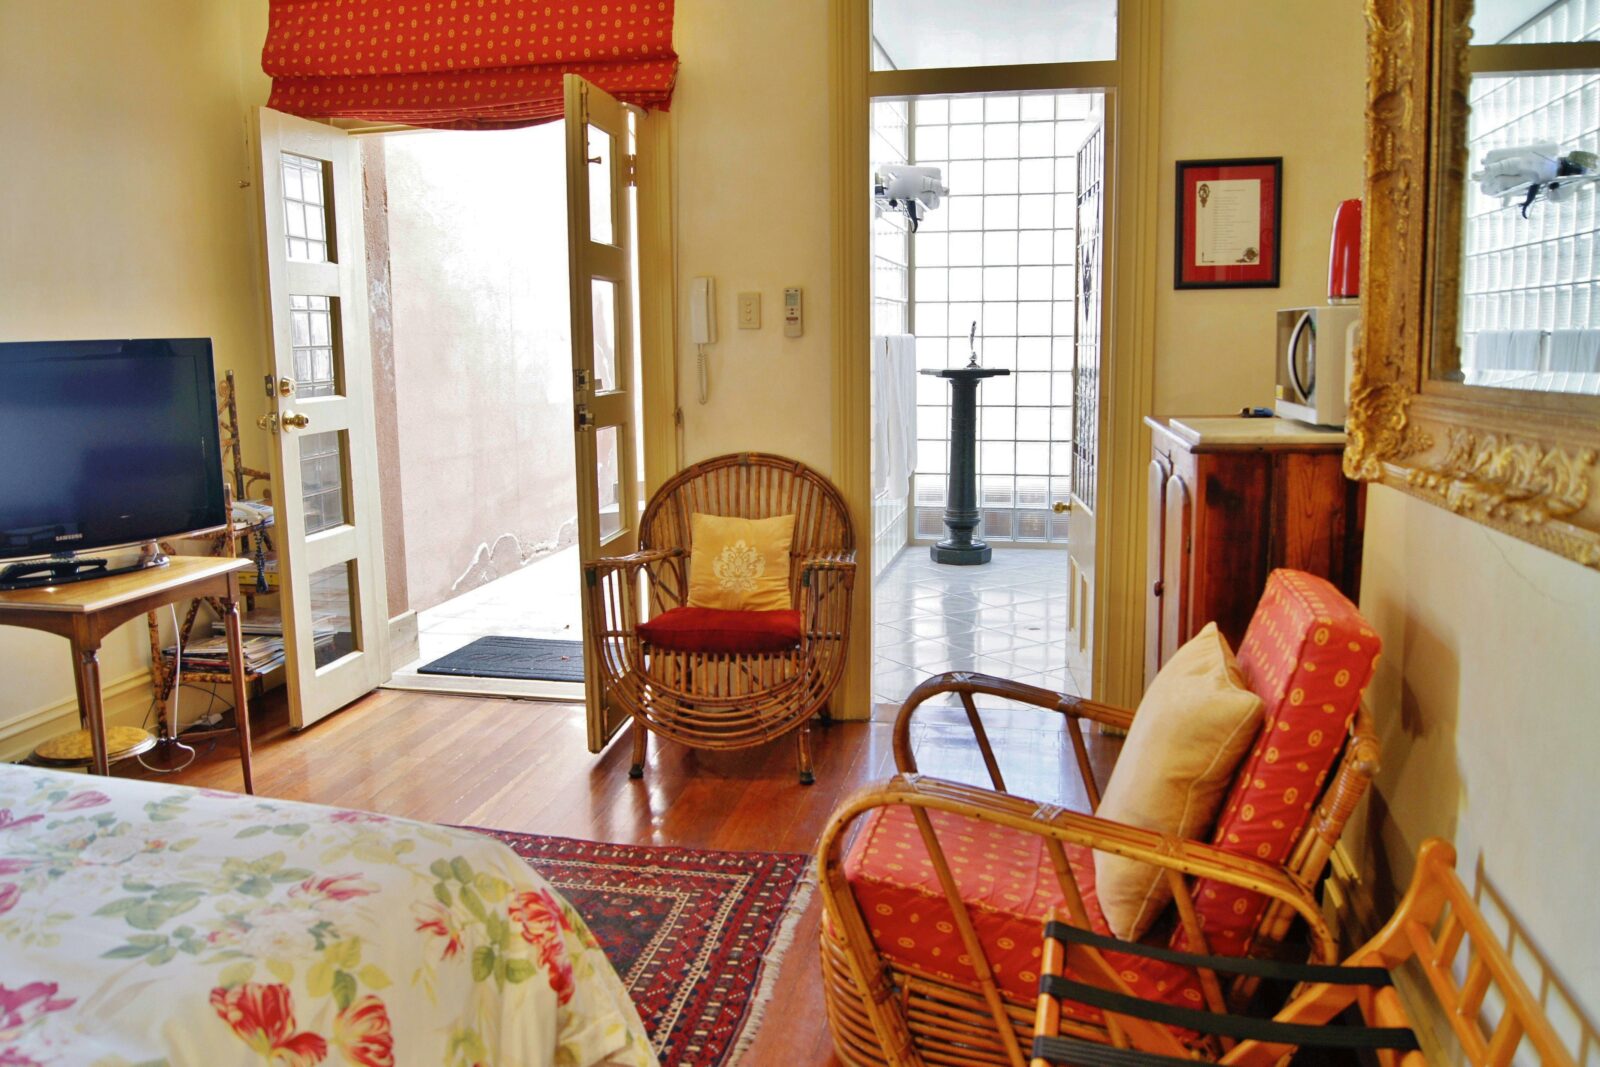 Loggia Spa Suite has private offstreet parking & courtyard